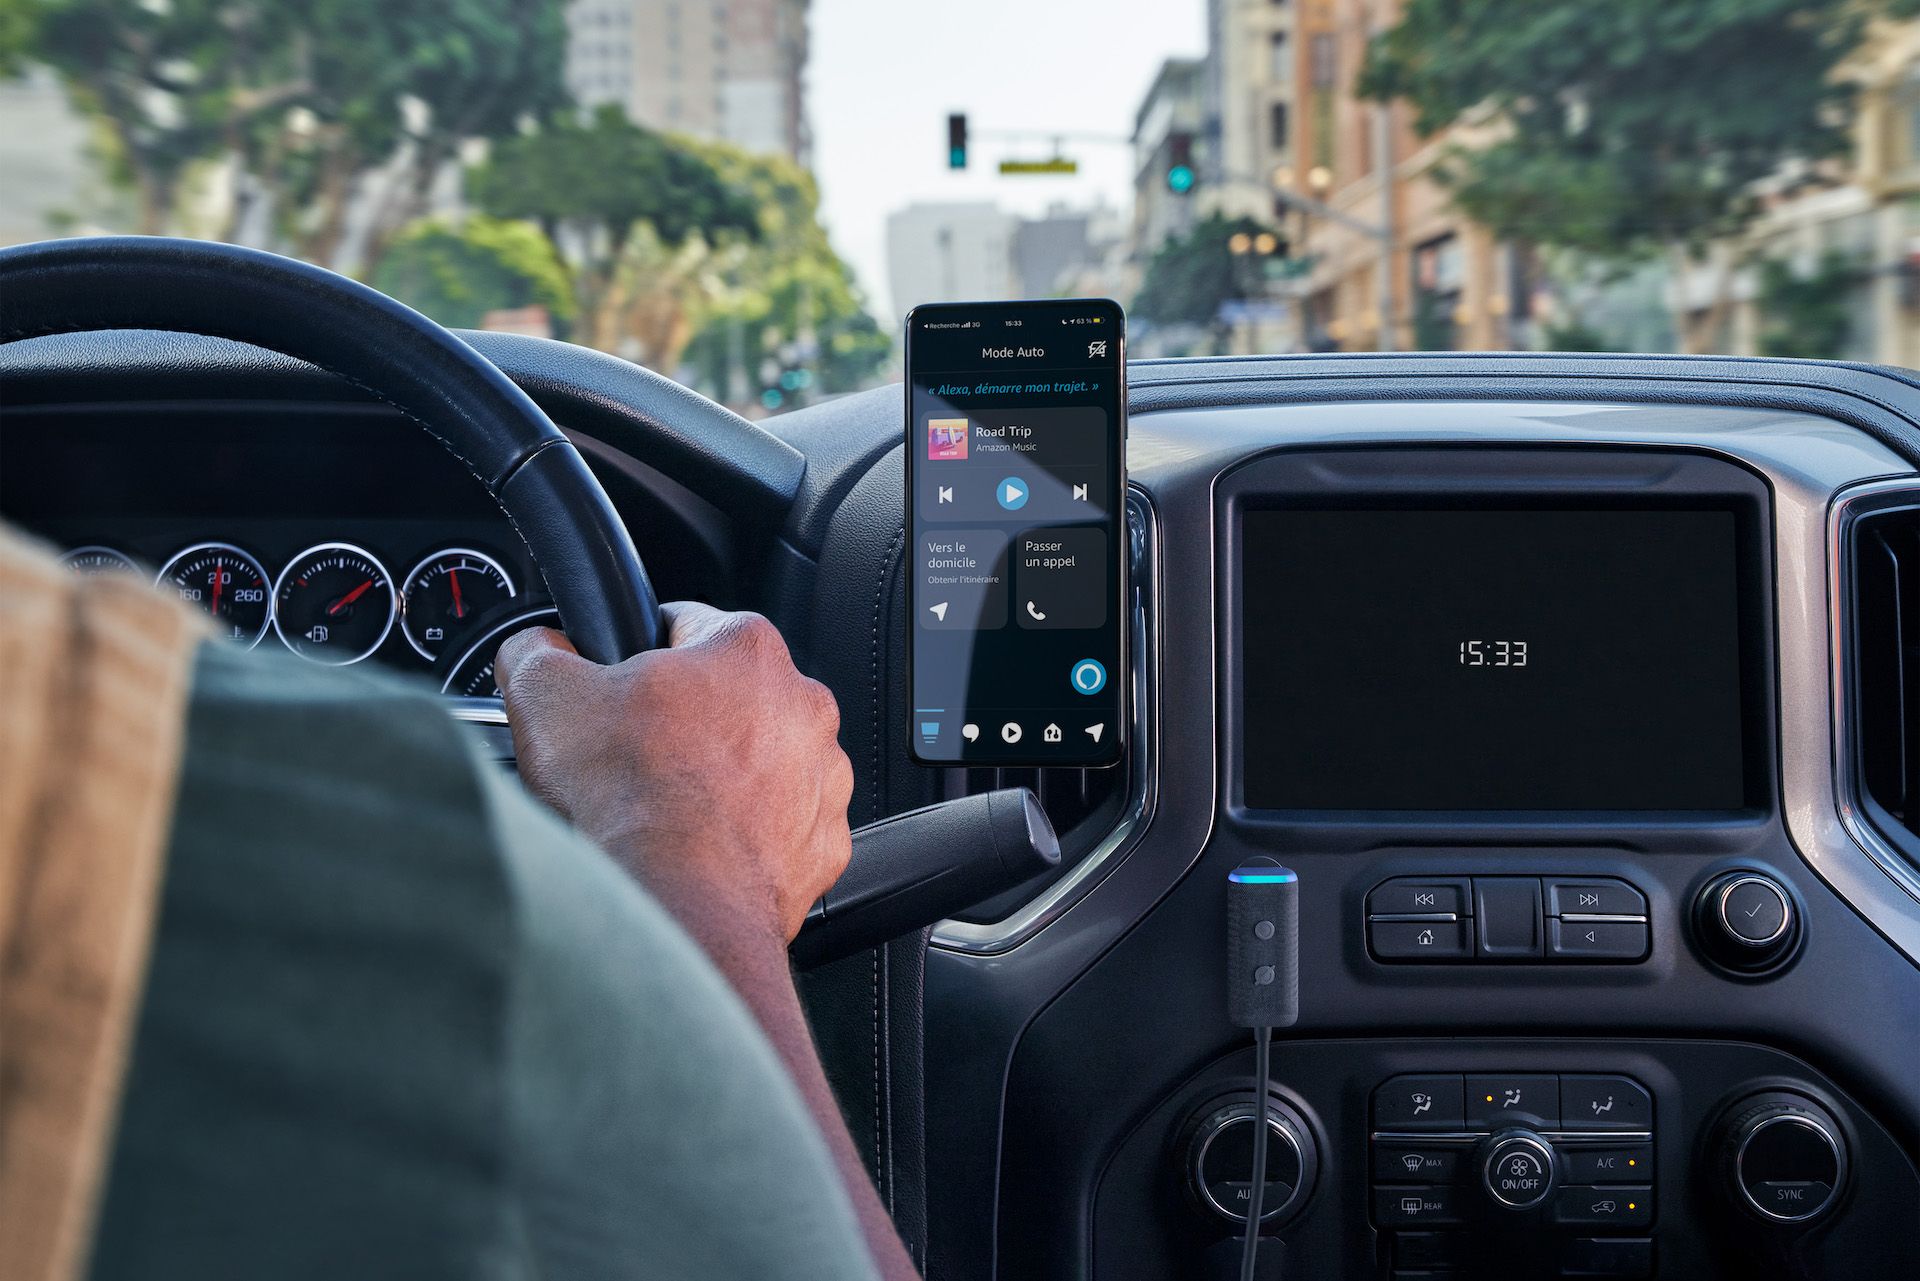 s redesigned Echo Auto will better integrate with your vehicle